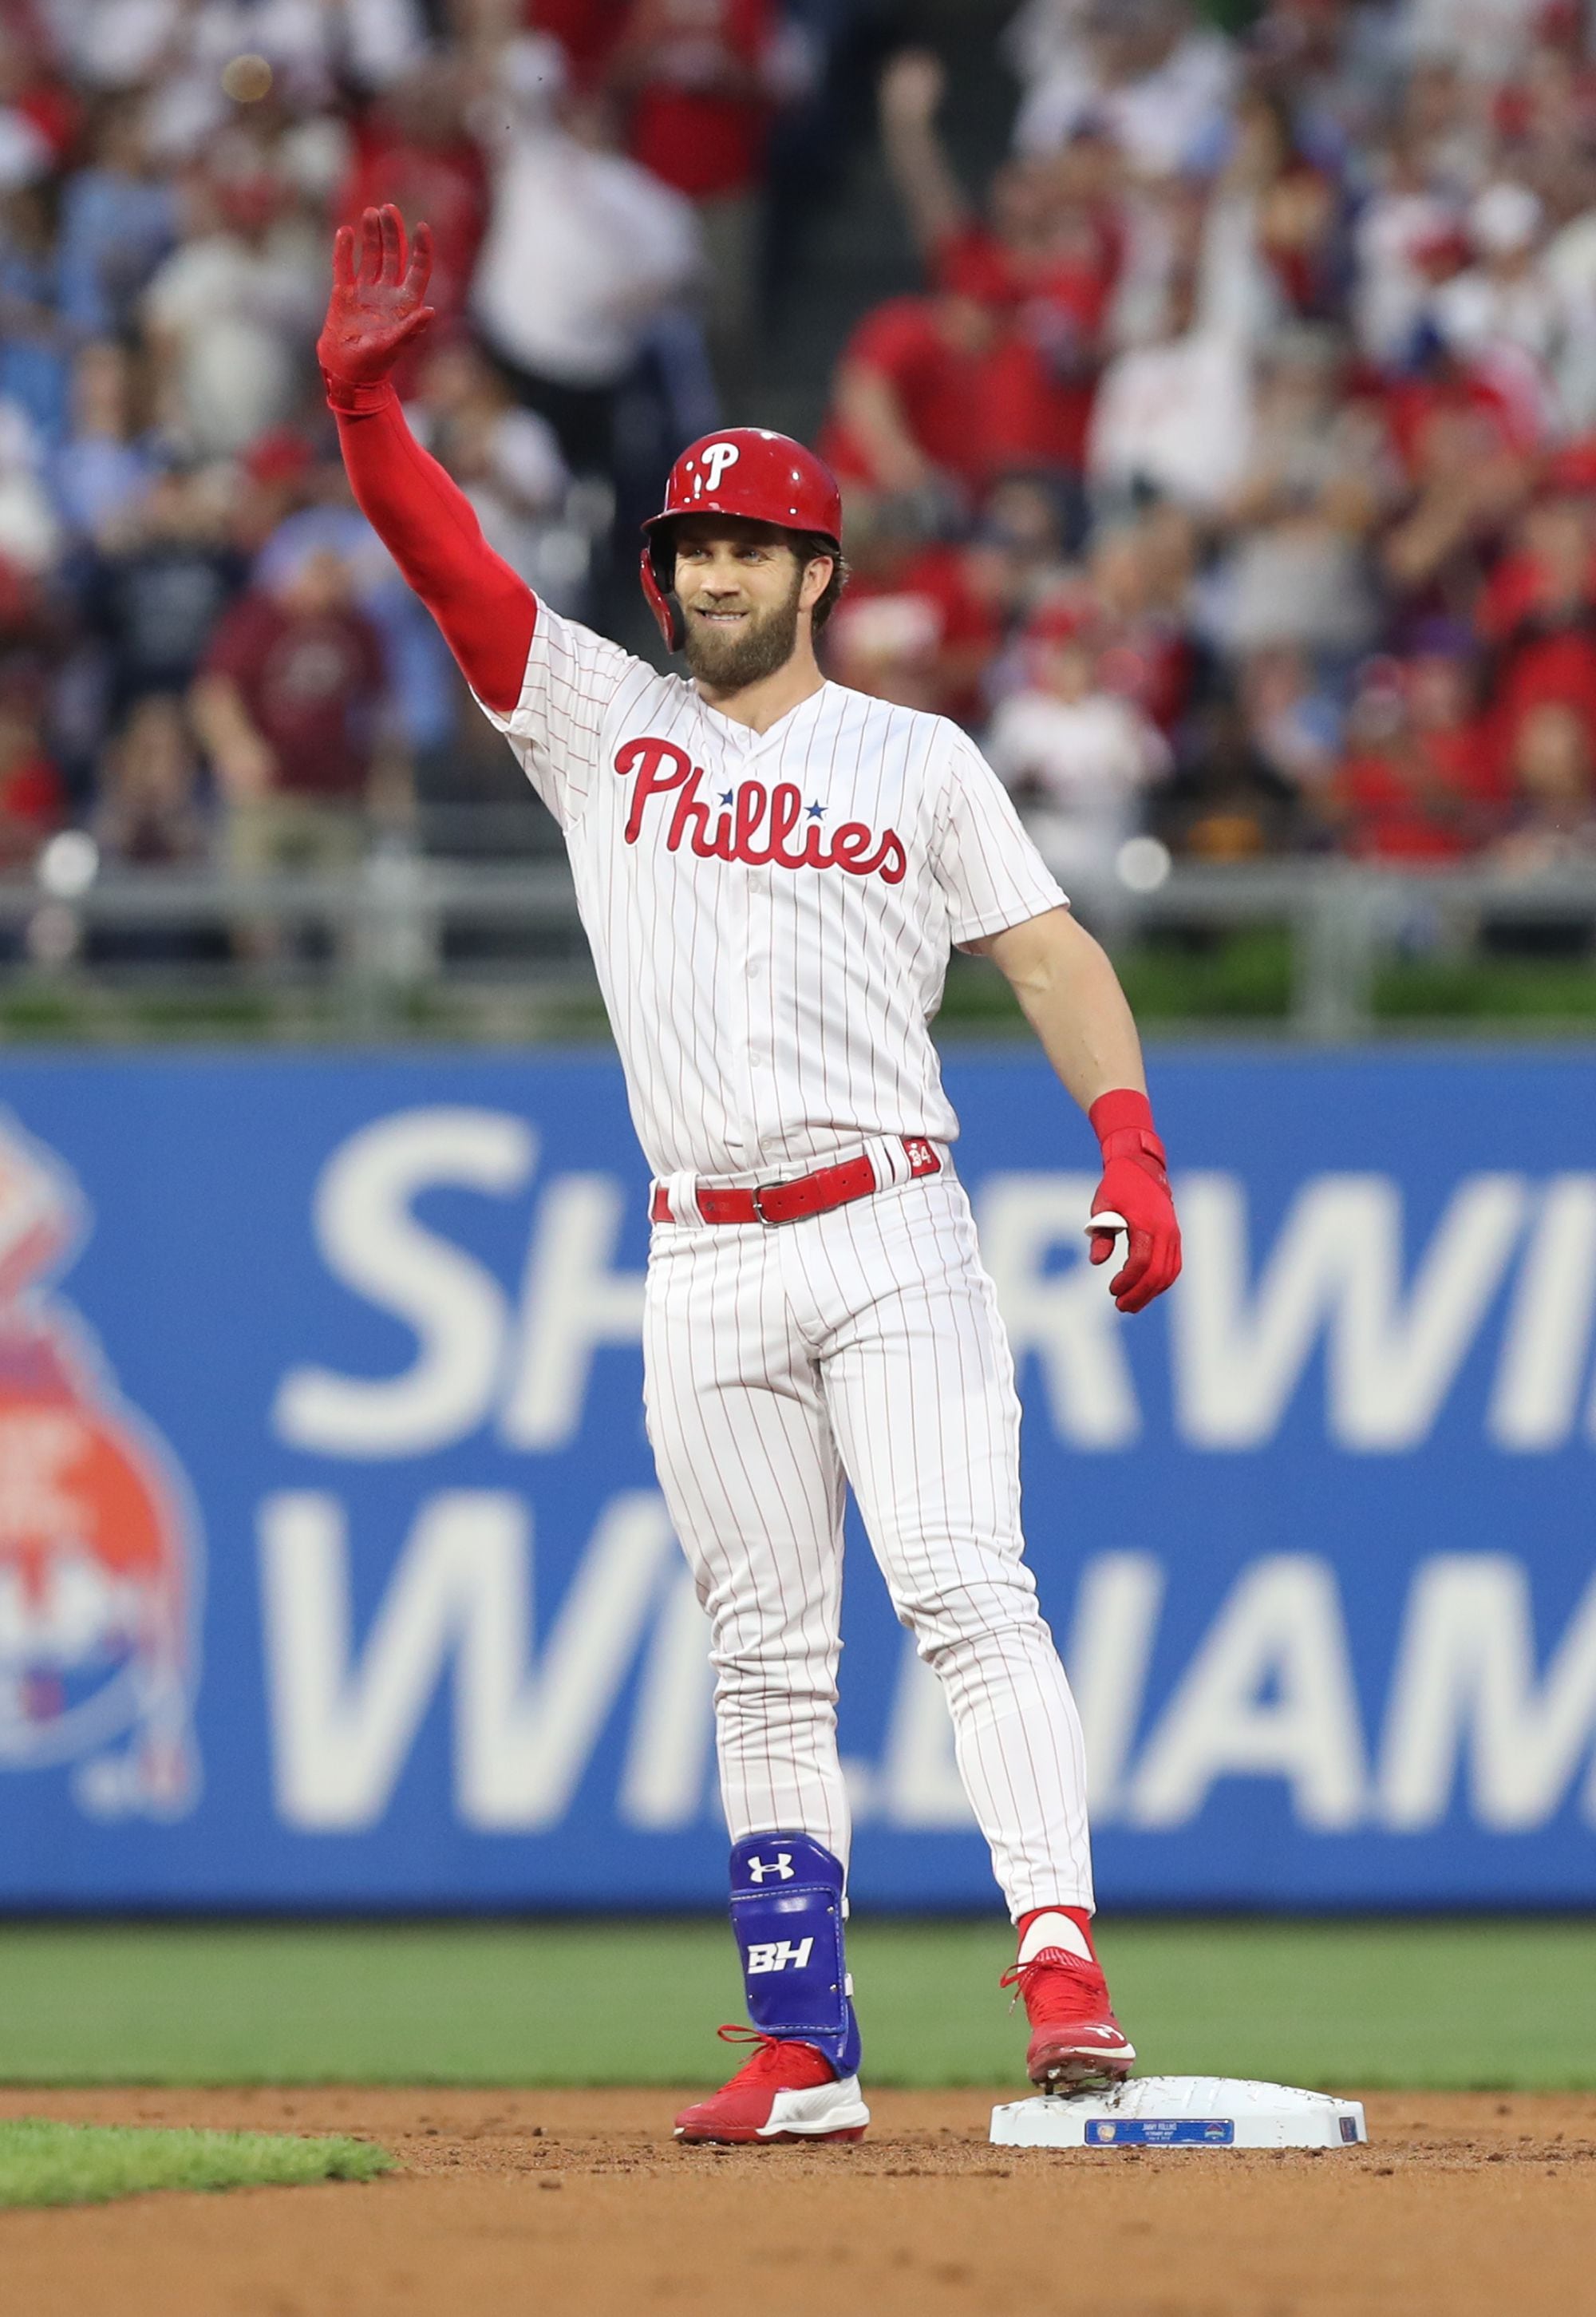 The story behind the Phillies' longstanding rule on retired